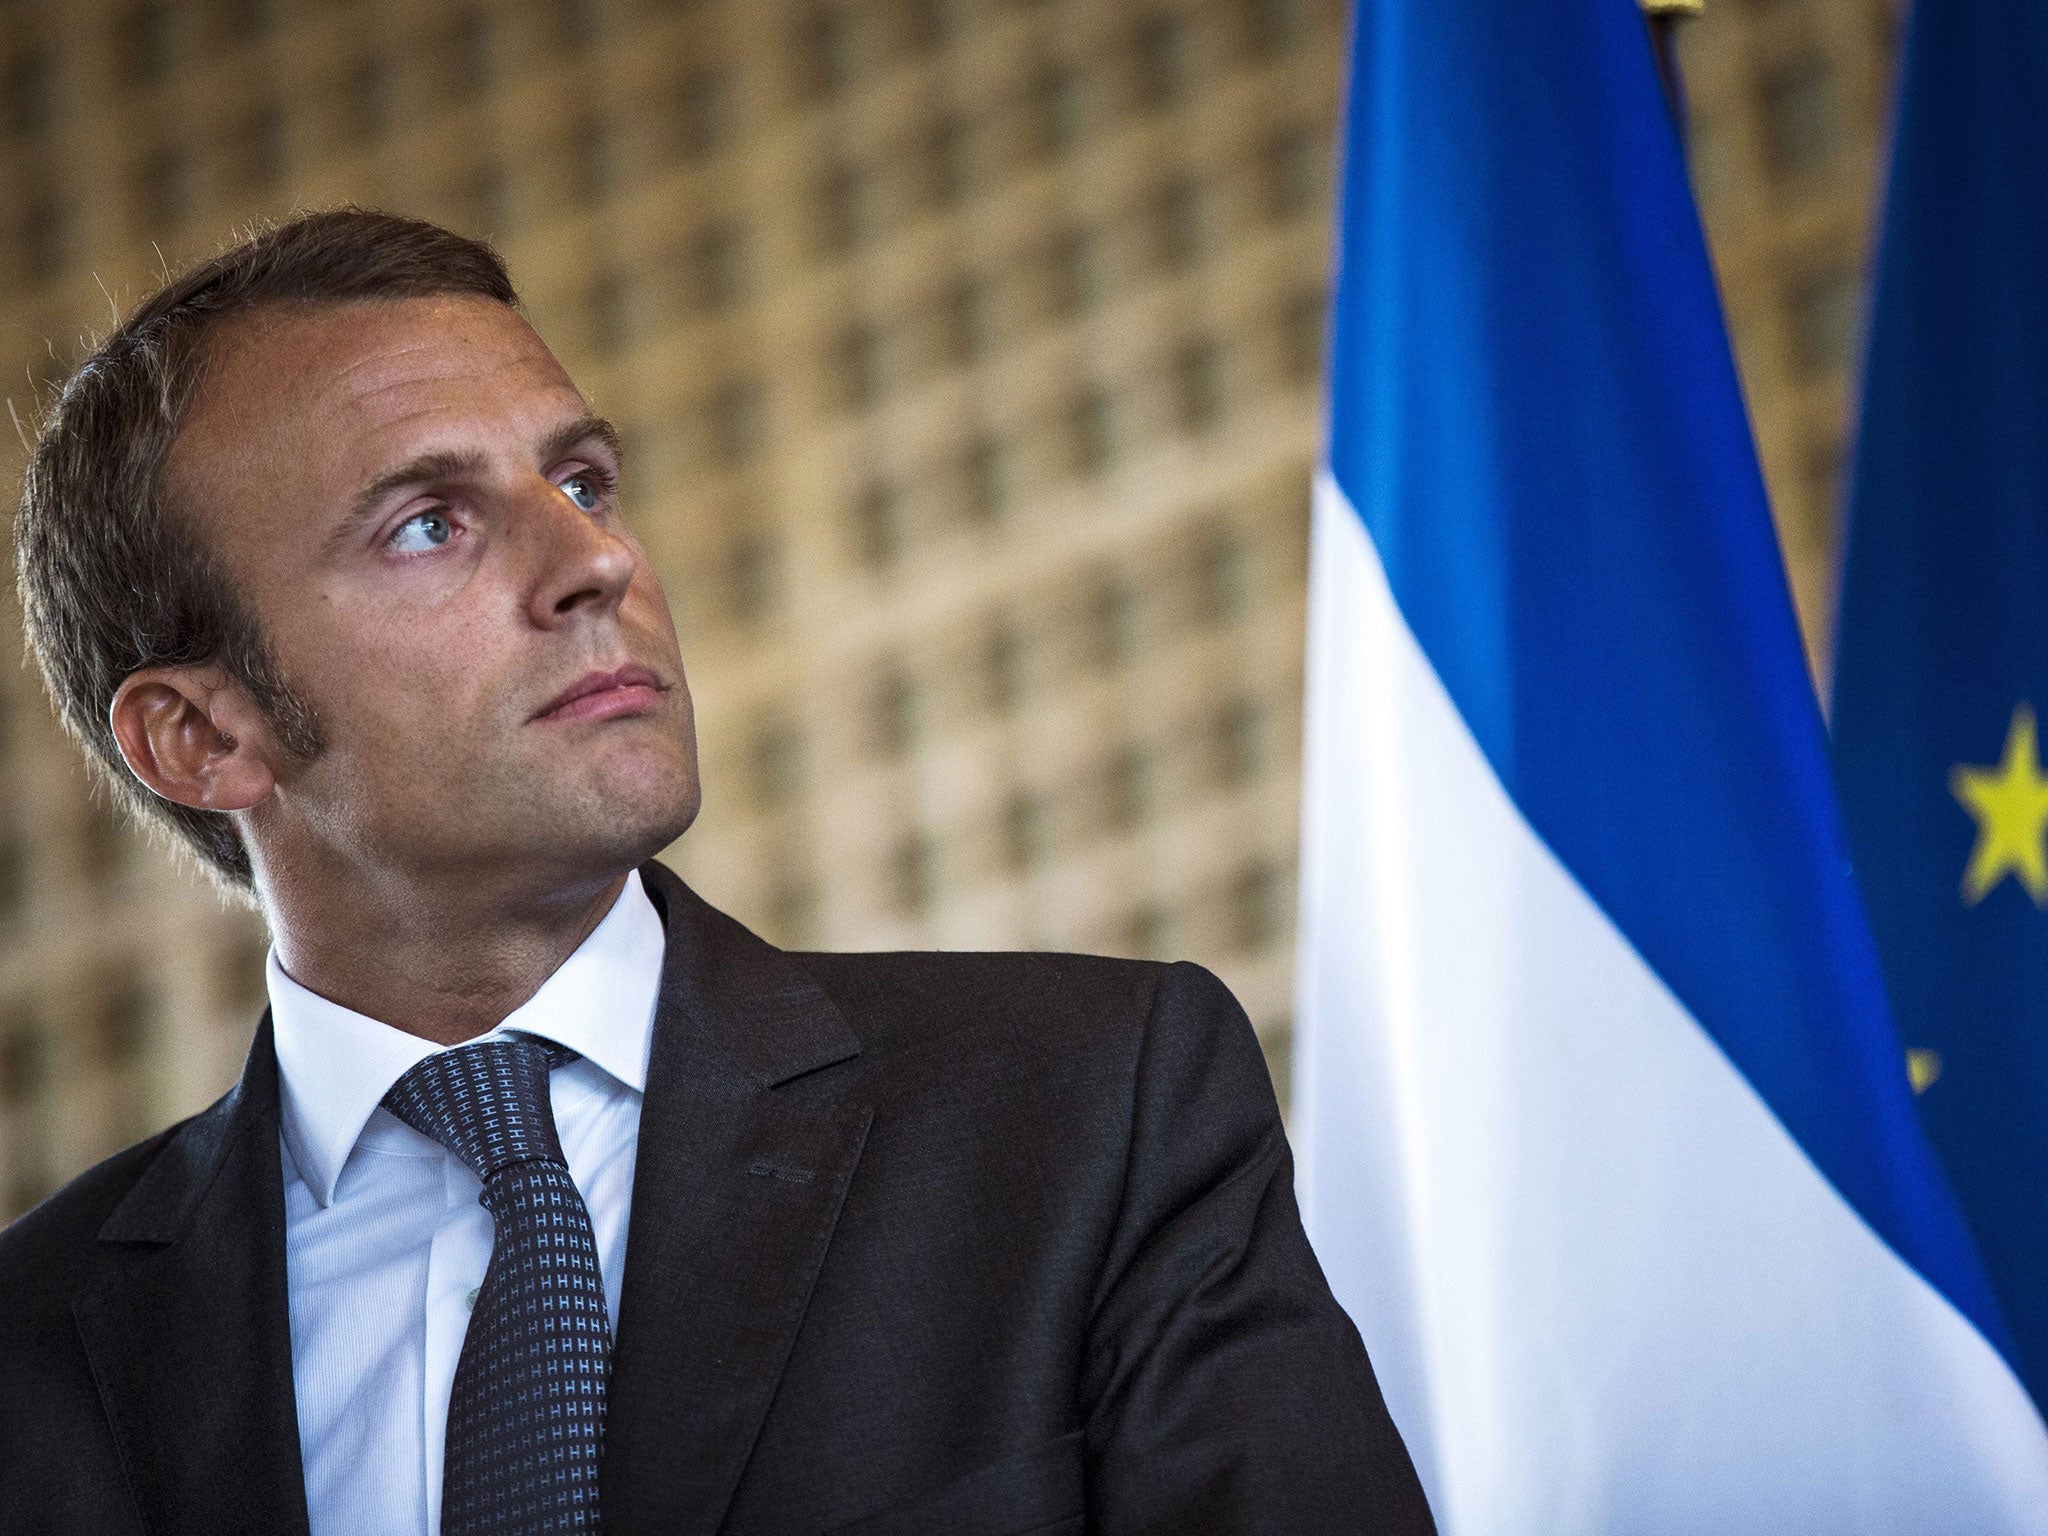 Not your typical French Socialist, Emmanuel Macron has been a Rothschild banker and an aide at the Élysée Palace